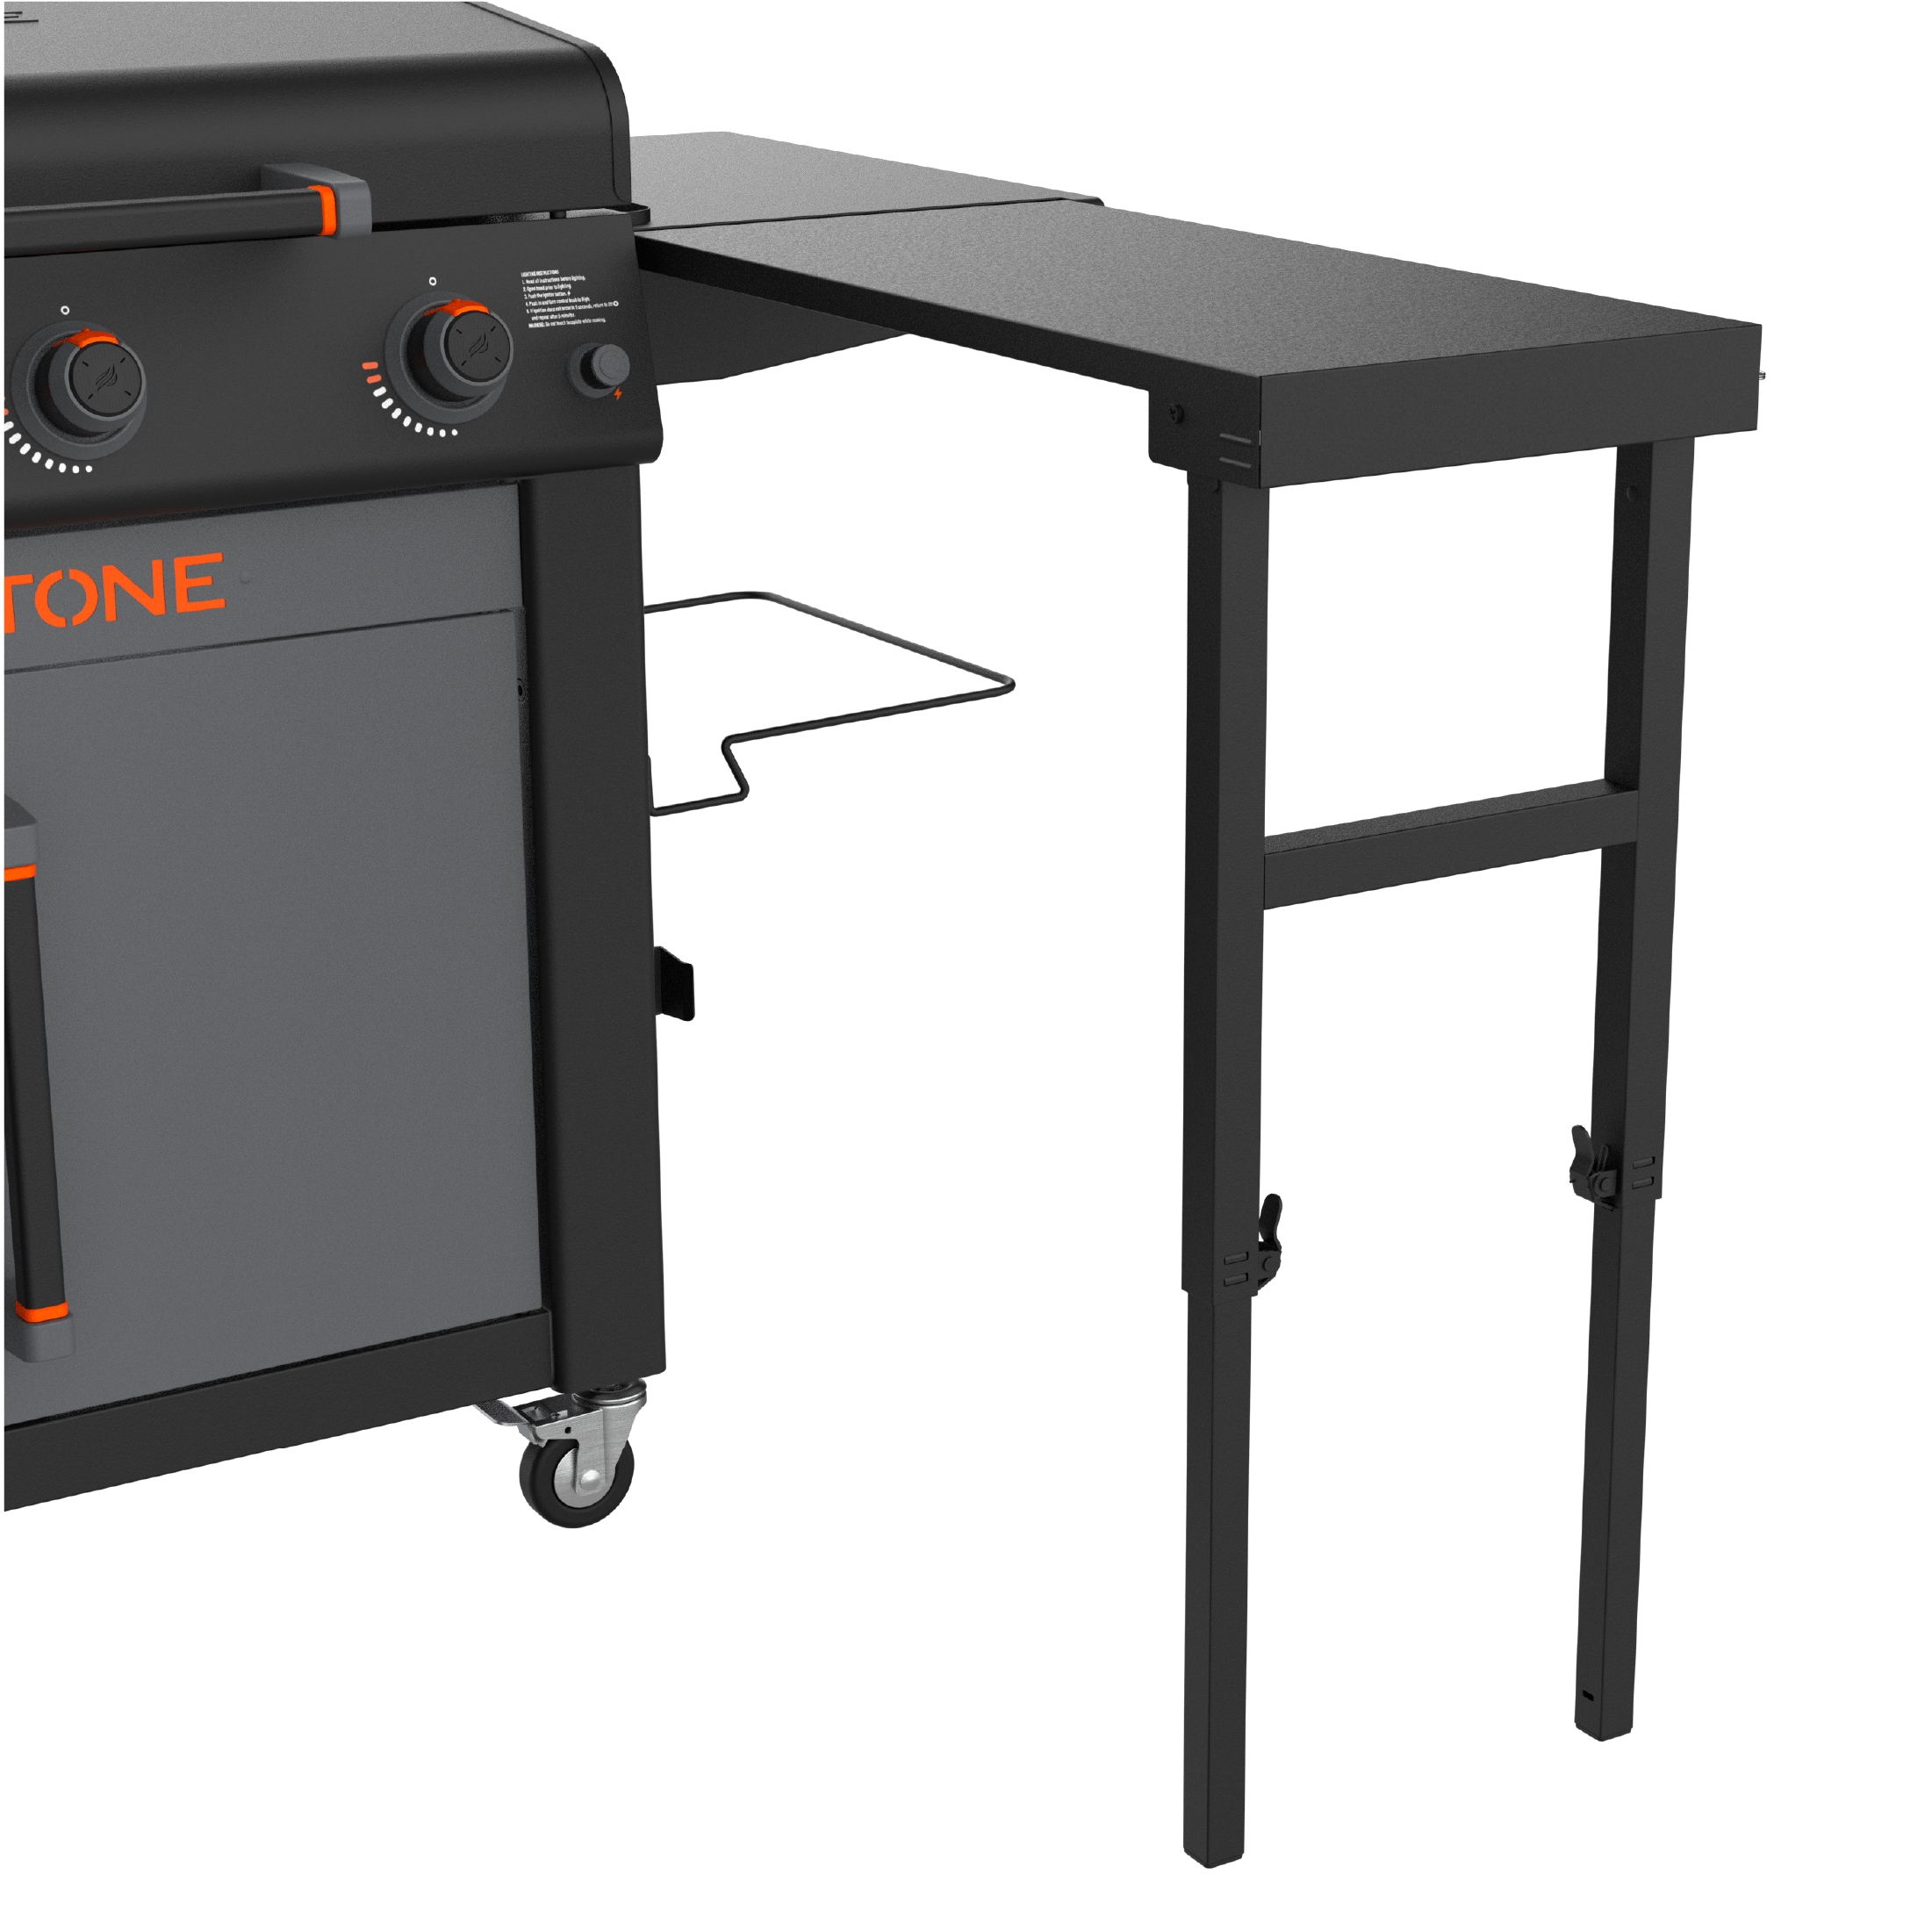 Blackstone 36 in. Liquid Propane Gas Flat Top Griddle with Side Tables -  Black